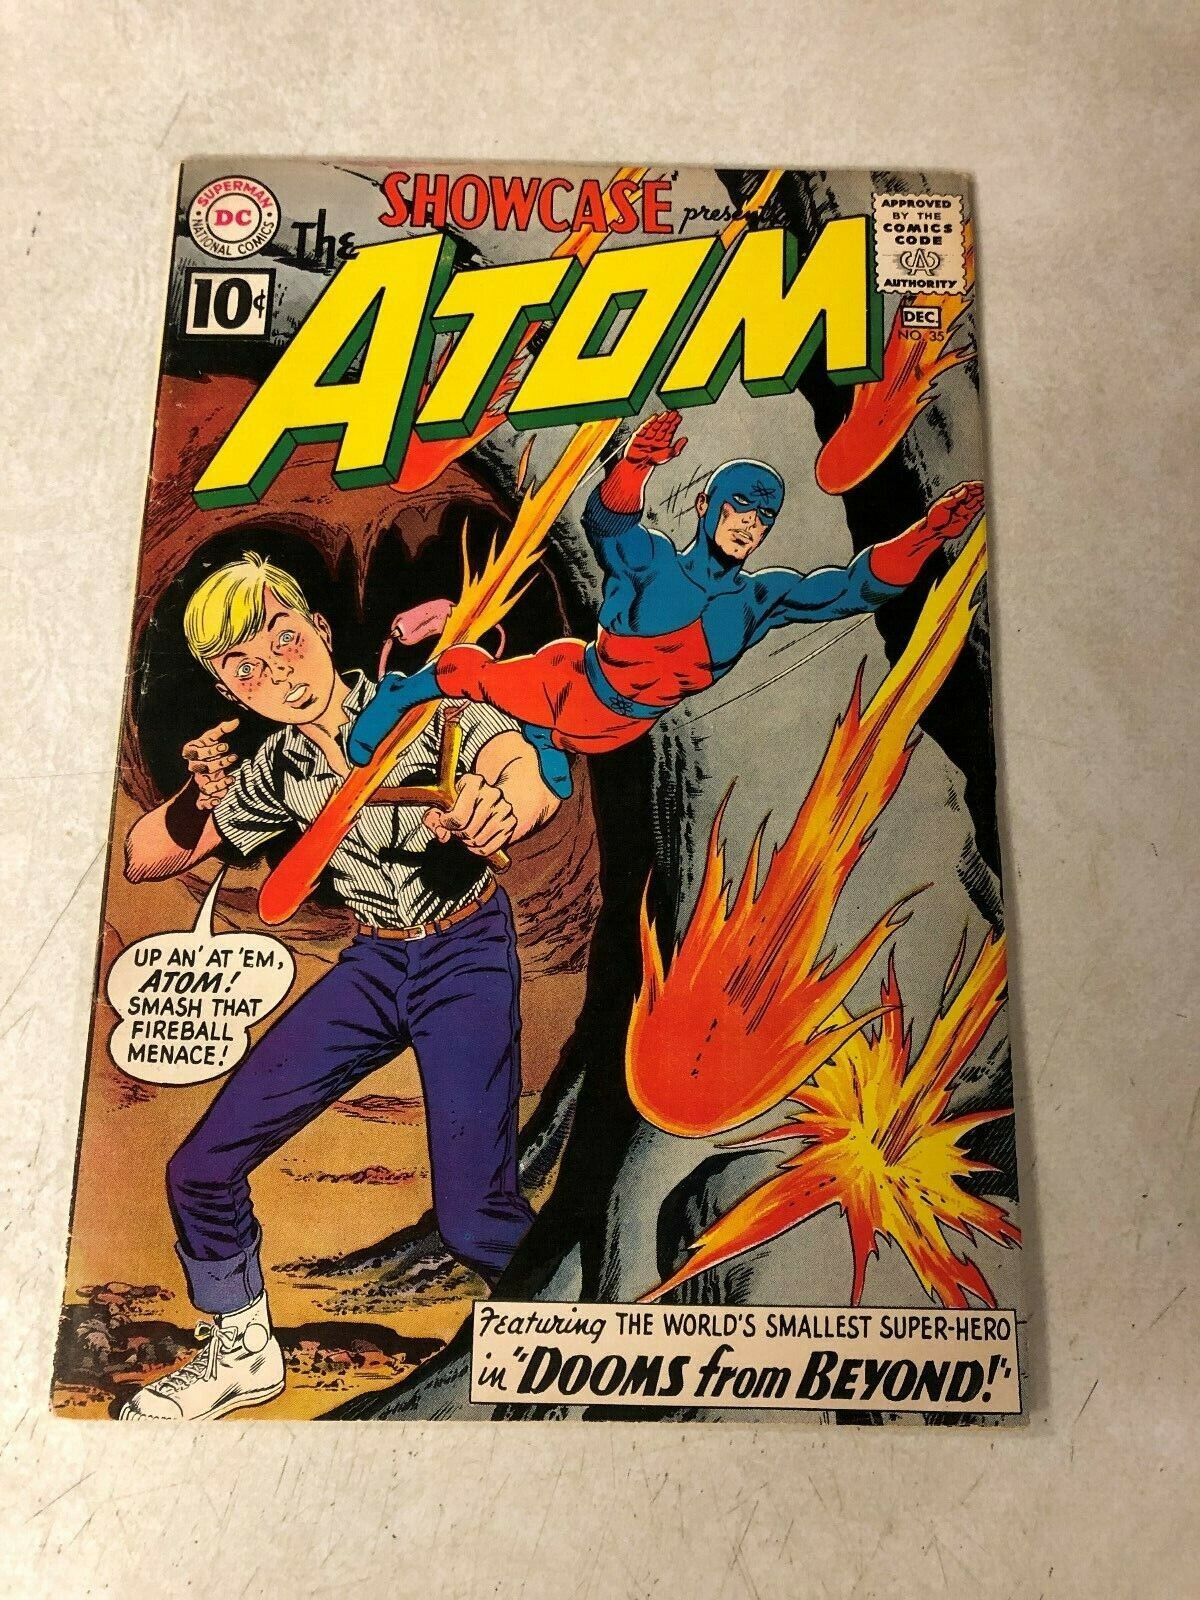 ATOM in SHOWCASE #35 KEY ISSUE 2ND APPEARANCE 1961 GIL KANE DOOMS FROM BEYOND